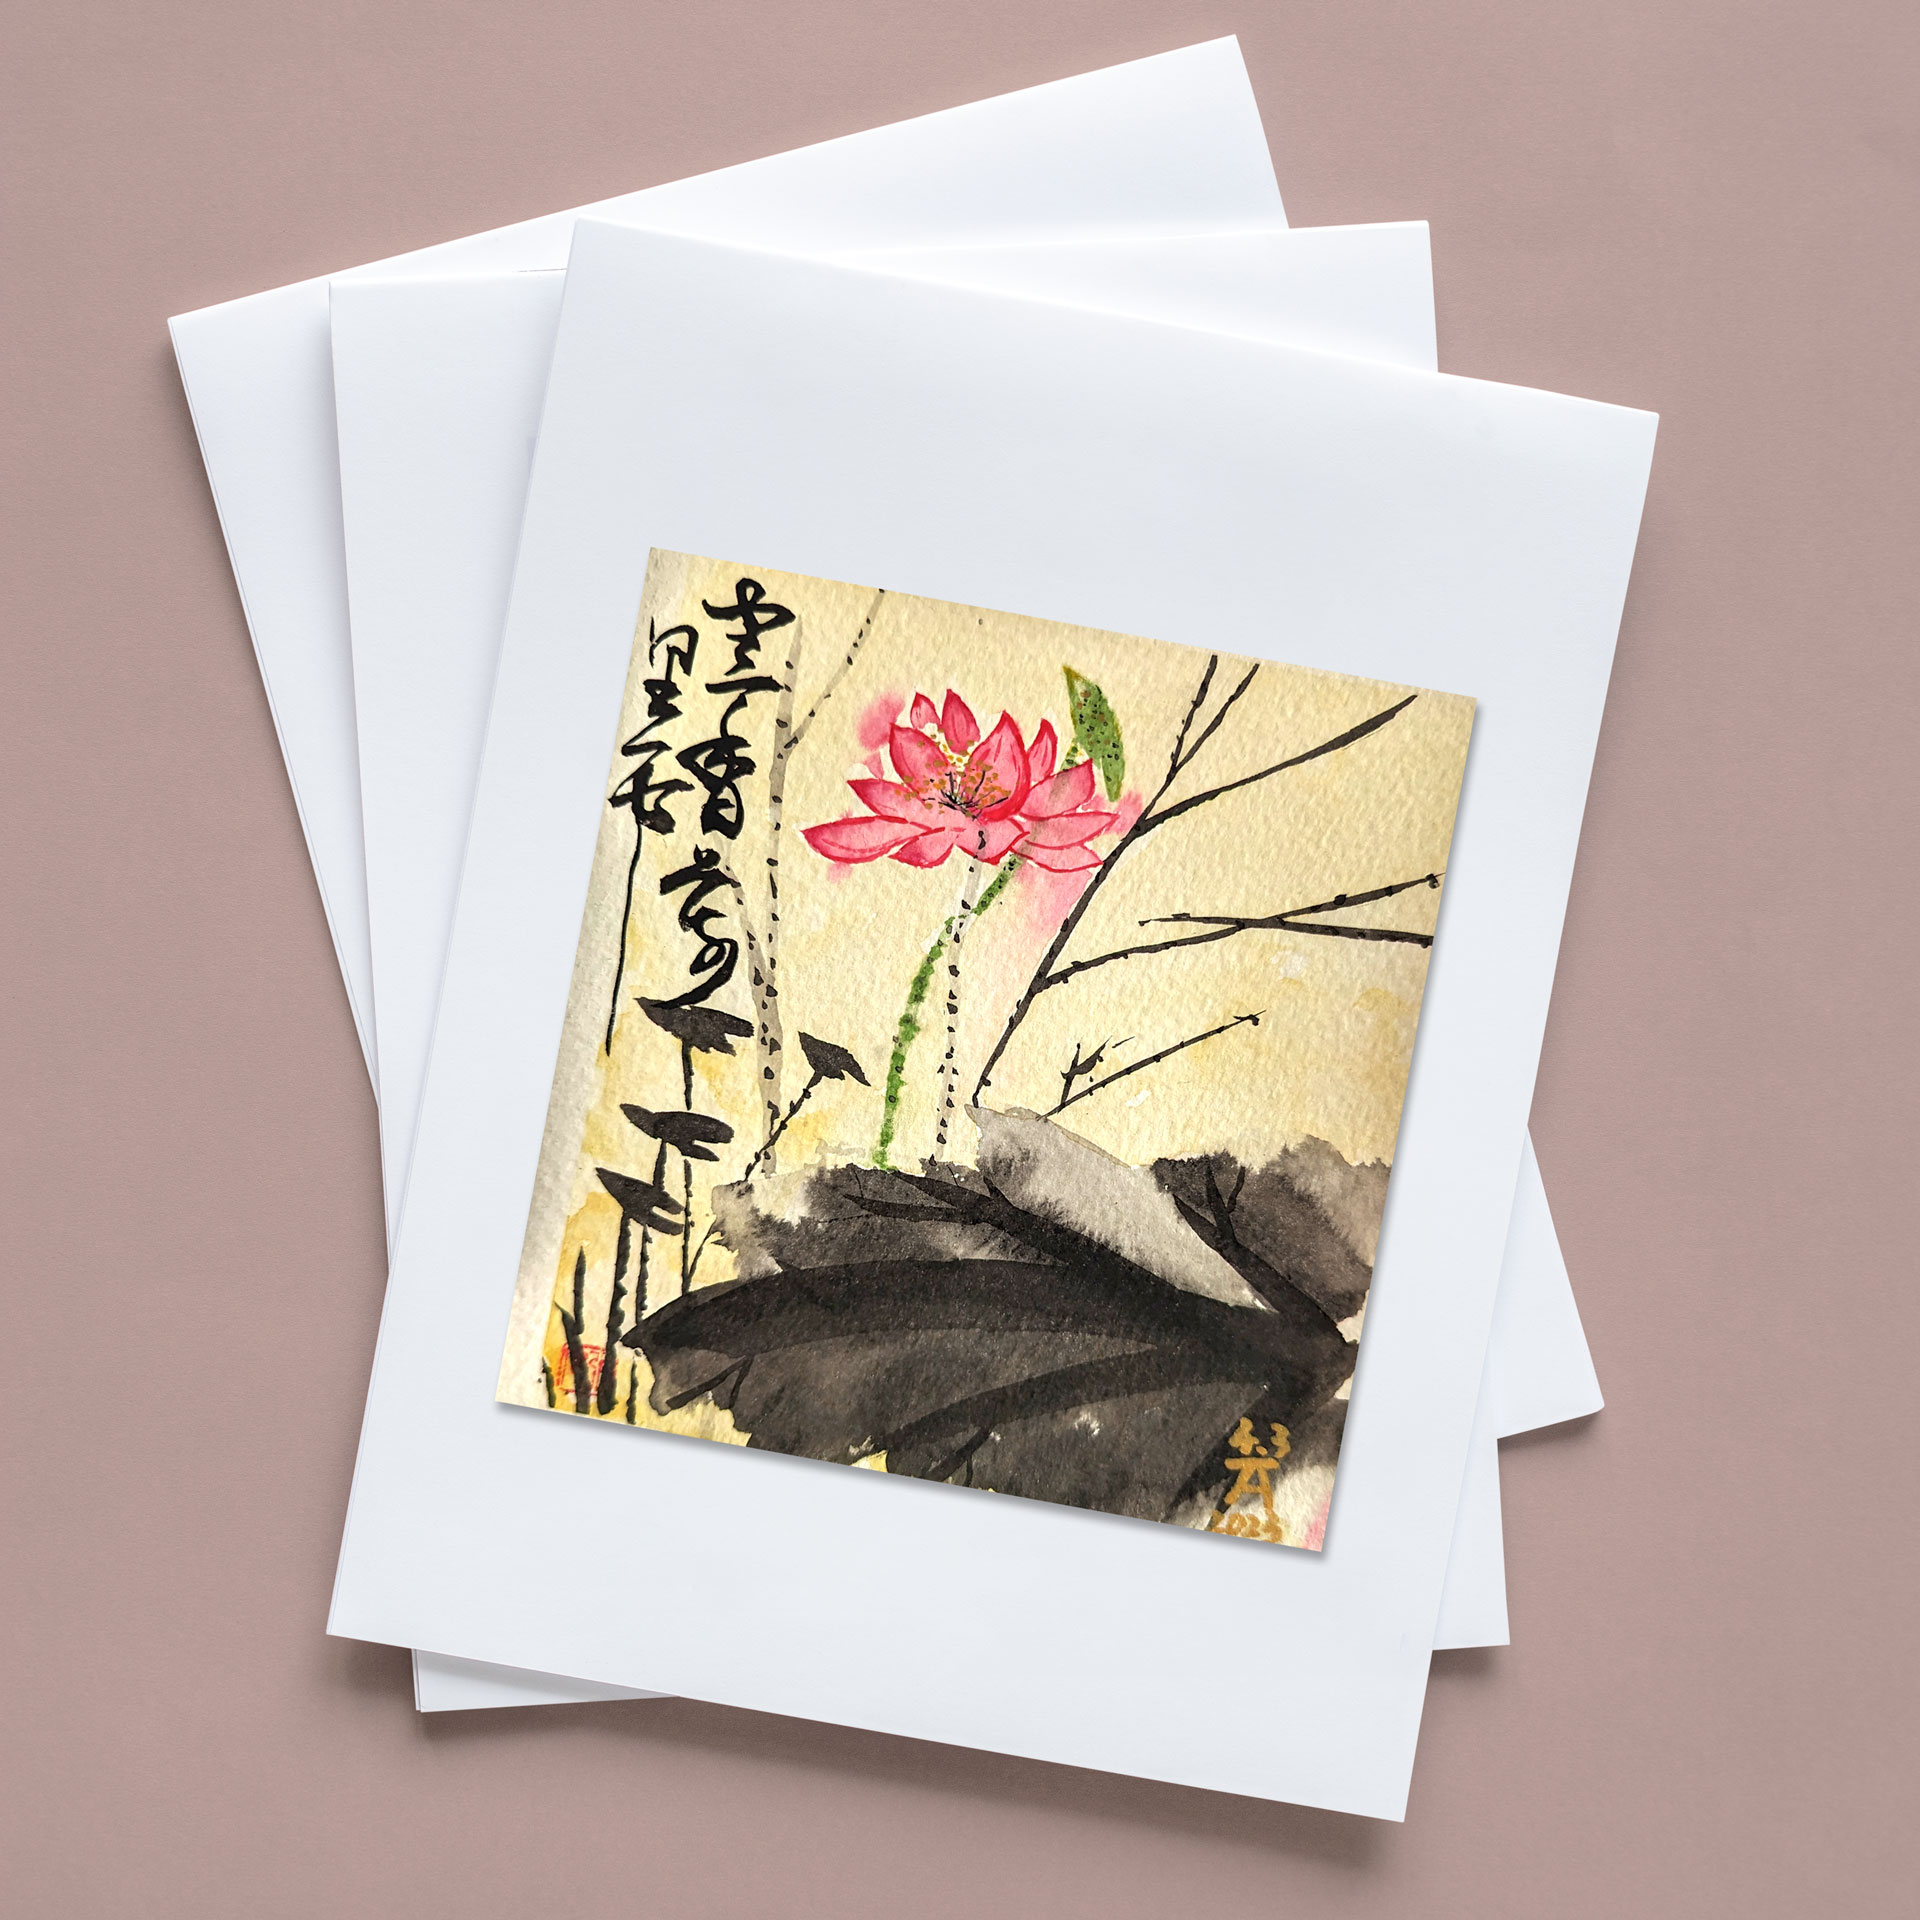 "Lotus" - Watercolor Greeting Card by Fan Stanbrough